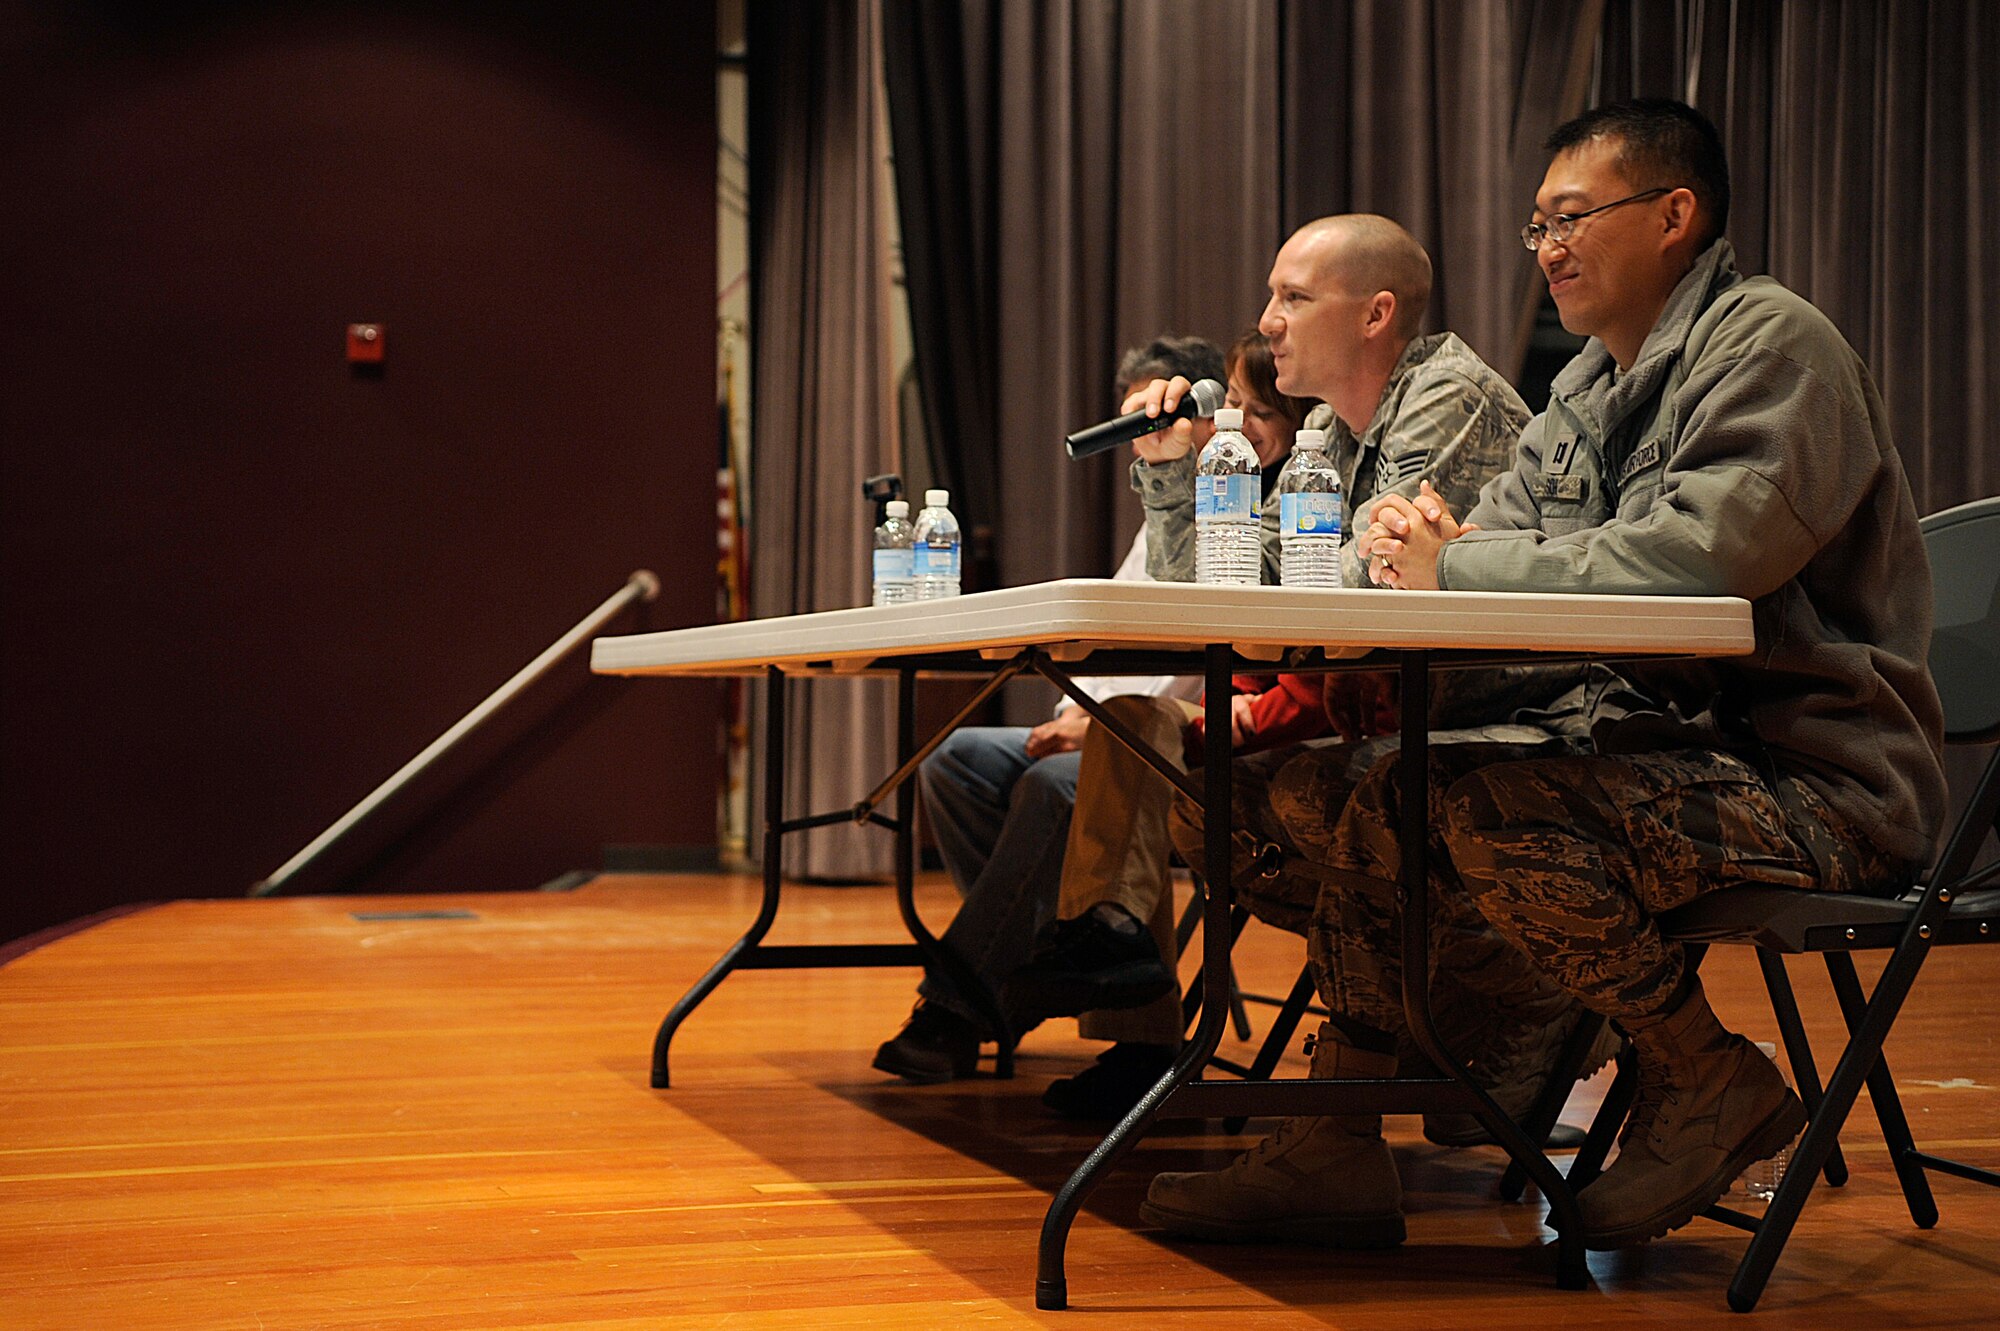 VANDENBERG AIR FORCE BASE, Calif. -- Staff Sgt. Charles Heairet, a 30th Civil Engineer Squadron explosives ordnance disposal technician, shares his deployment story during the Theater of War event at the base theater here Thursday, Jan. 20, 2011.  The members spoke about their personal experiences about being deployed.  (U.S. Air Force photo/Senior Airman Andrew Satran) 